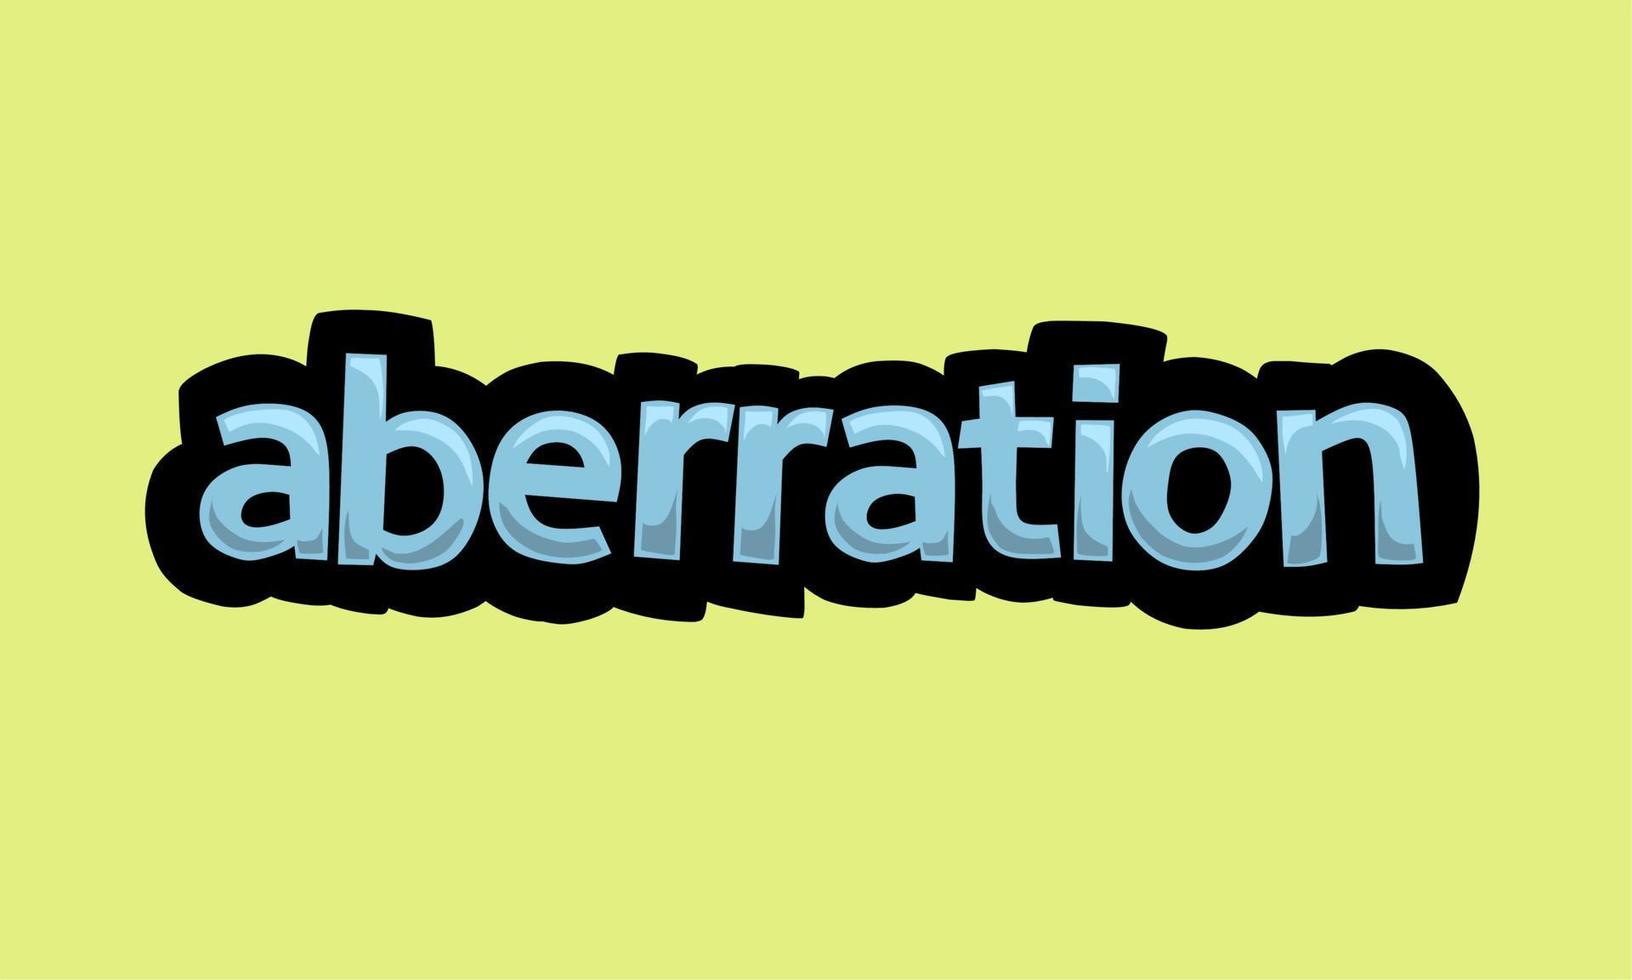 ABERRATION writing vector design on a yellow background